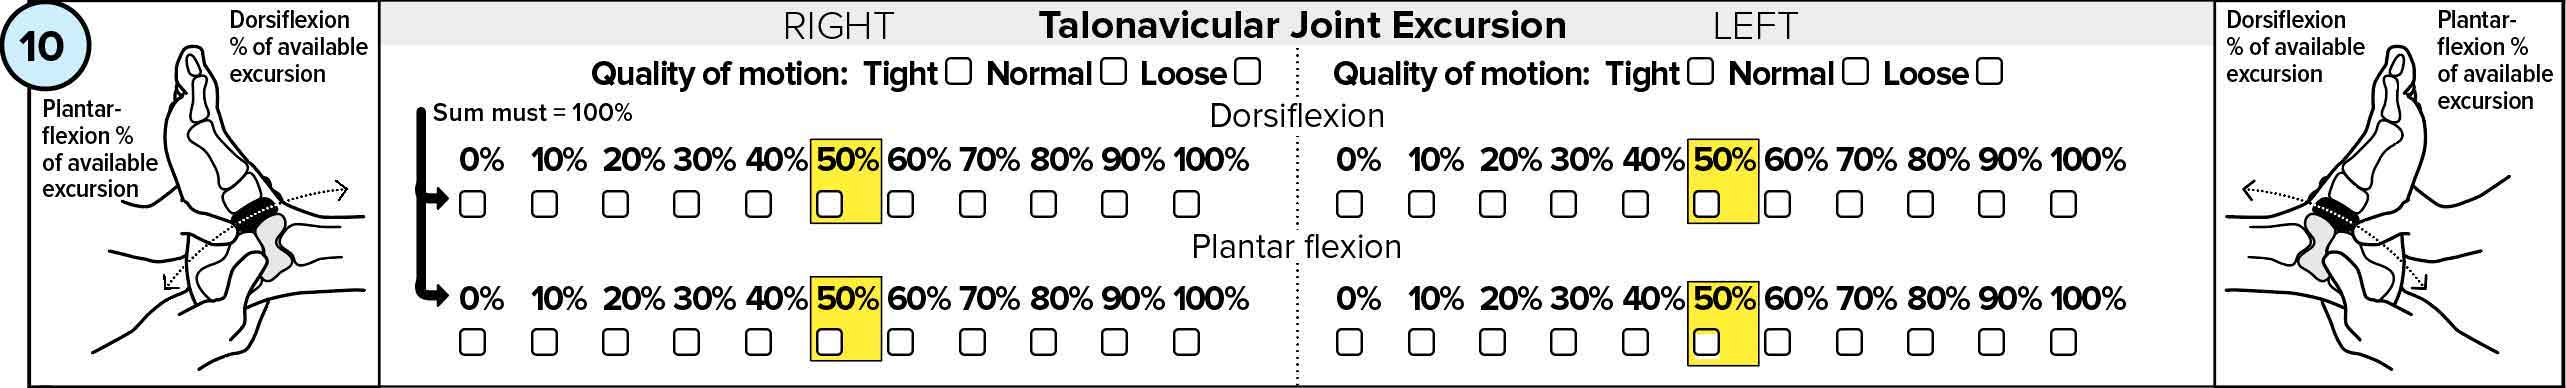 Talonavicular Joint Excursion